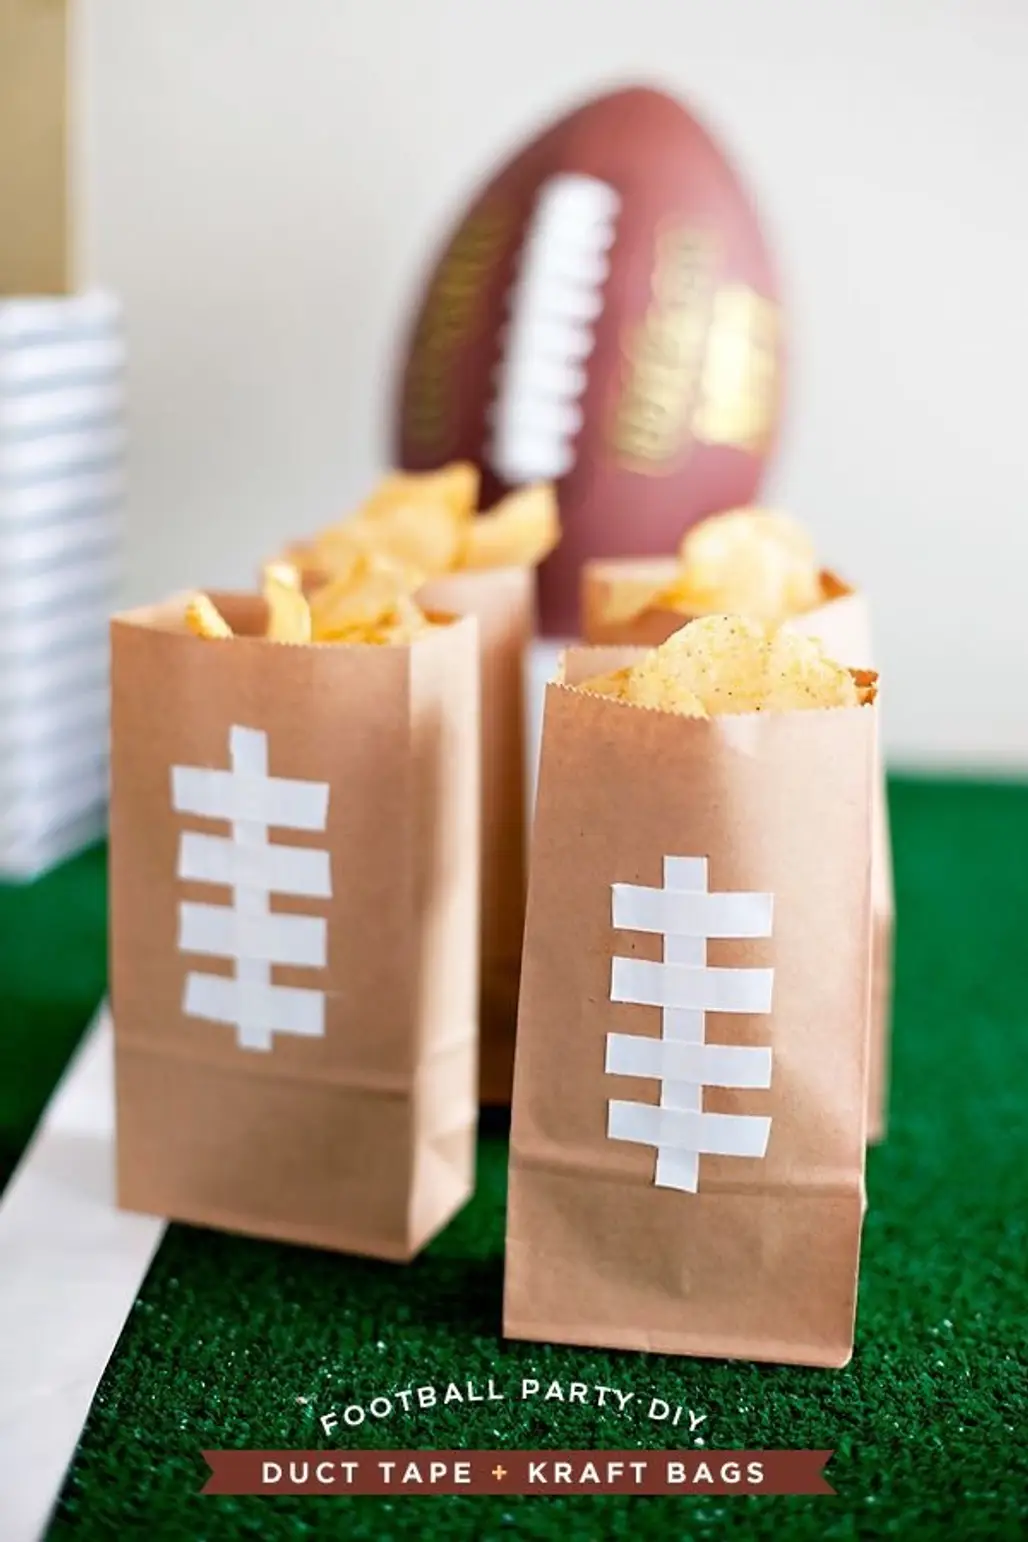 Chips in a Football Bag